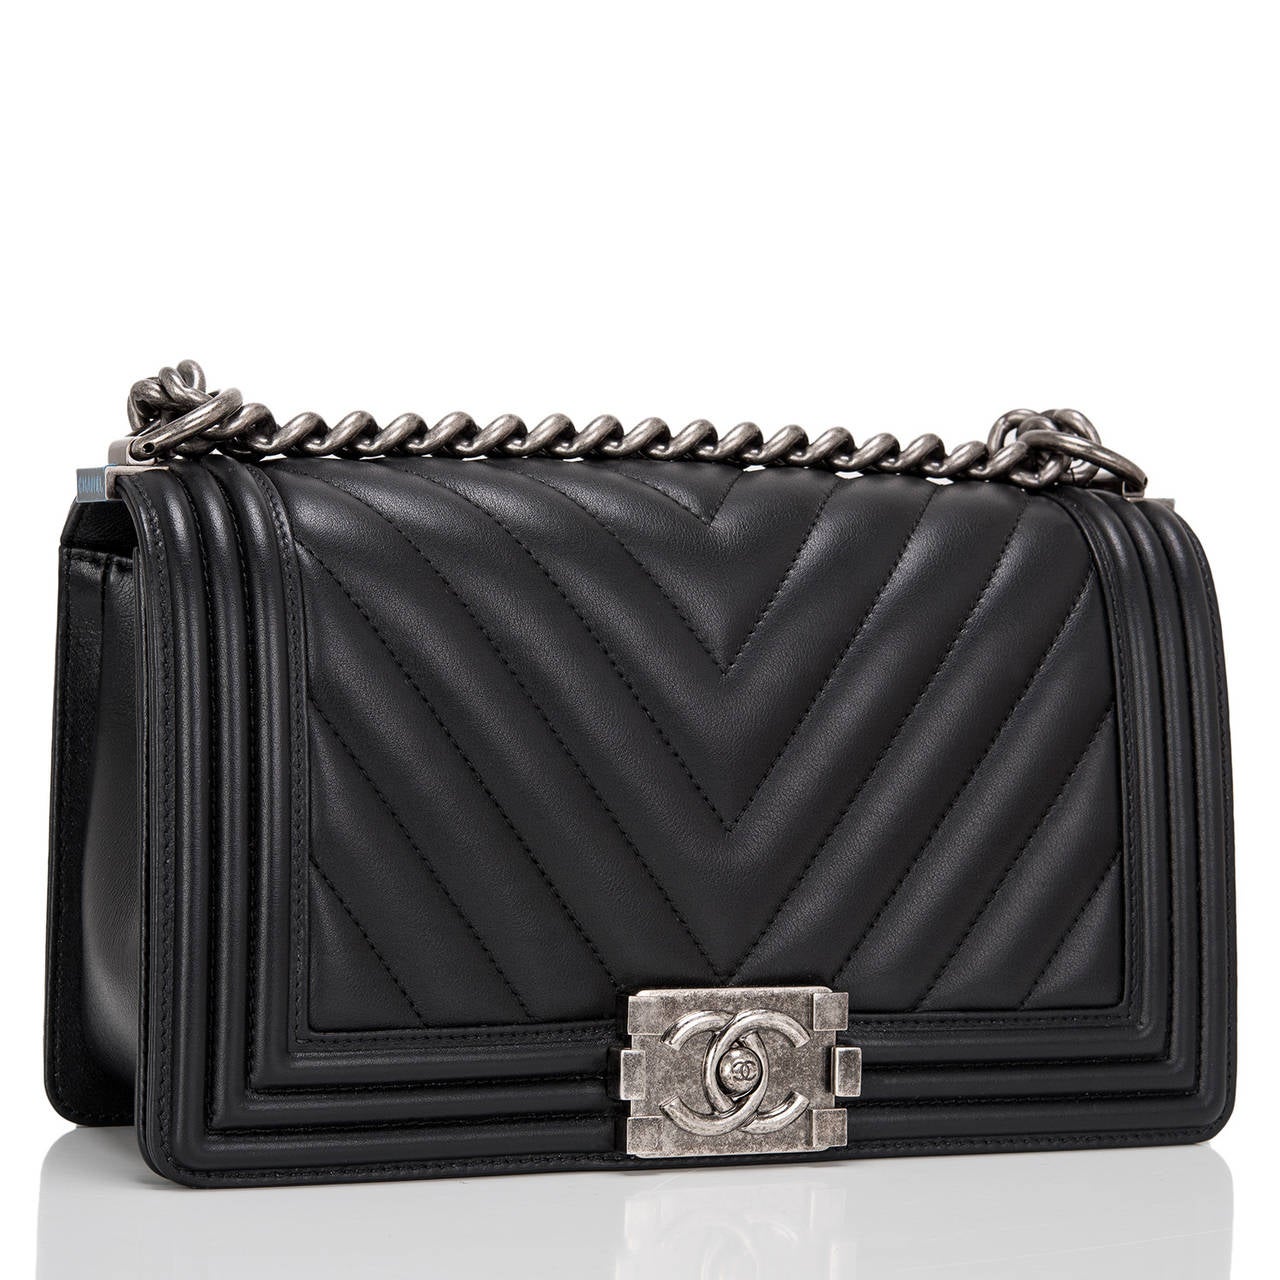 This Chanel black Chevron Medium Boy bag features beautiful black quilted chevron calfskin and aged ruthenium hardware. This Chanel bag is in the classic Boy style with a full front flap with the Boy signature CC push lock closure detail and aged